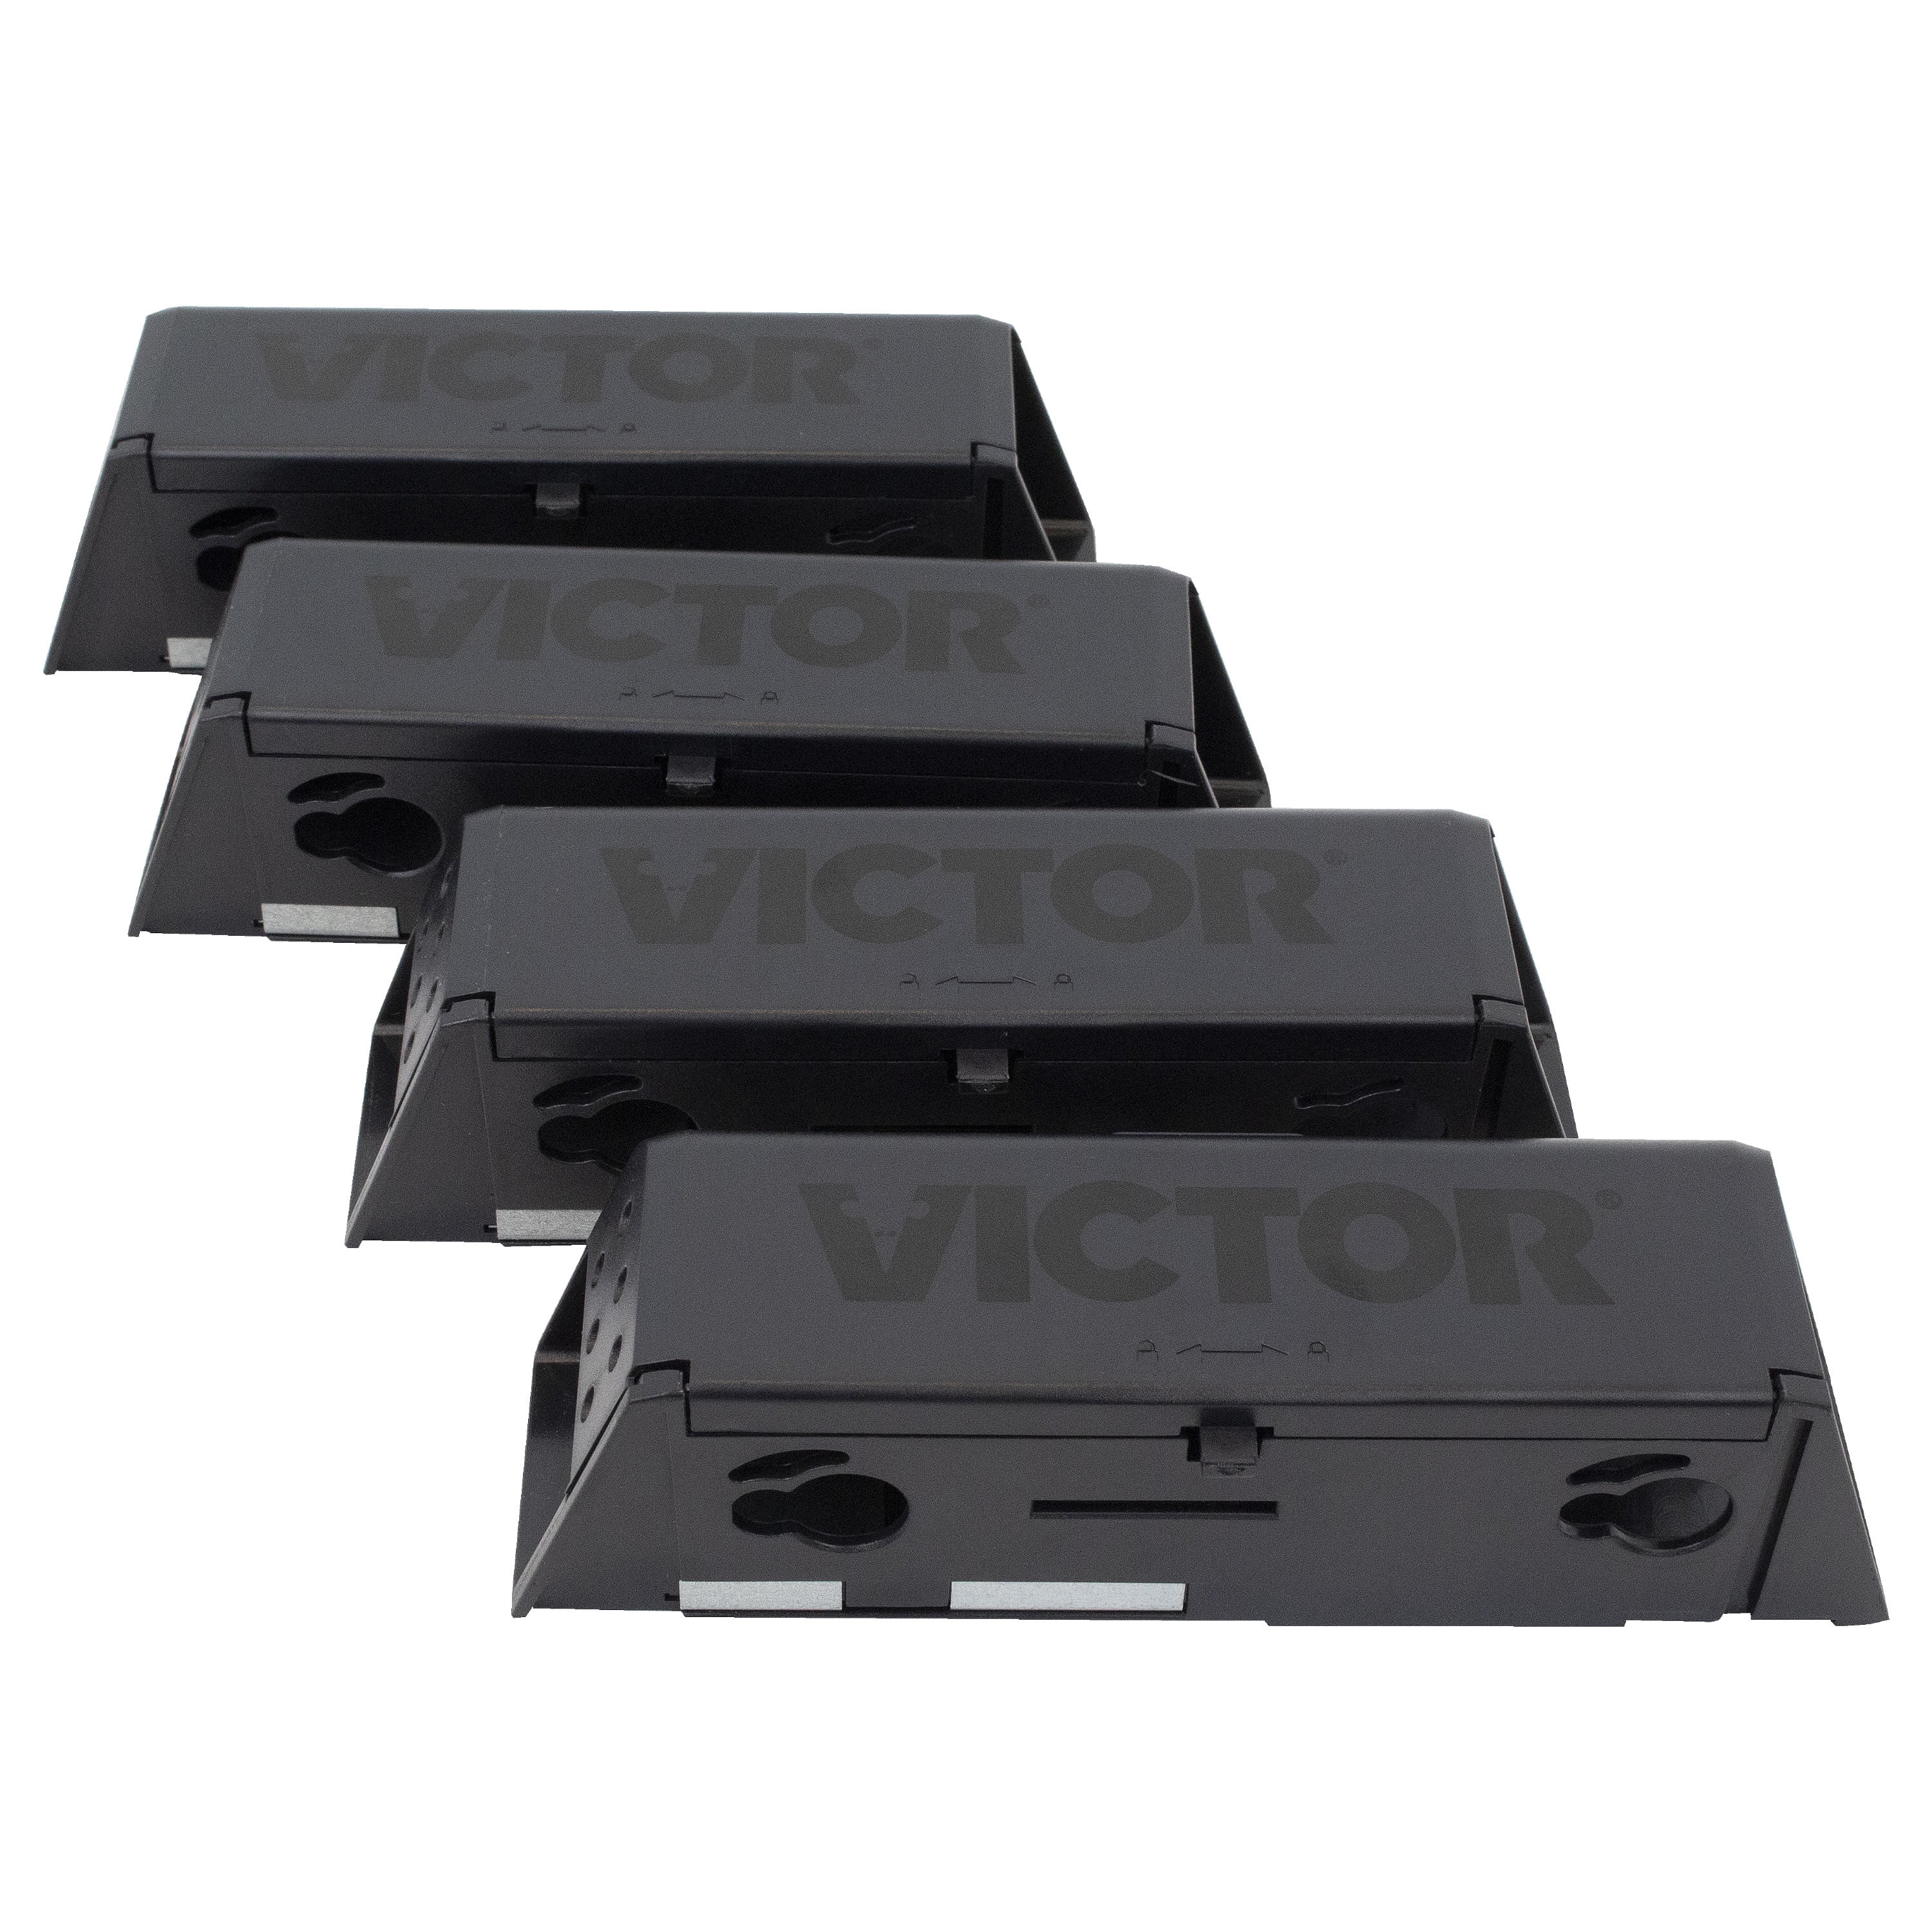  Victor M2524S Electronic Mouse Trap- No touch, No See disposal  : Rodent Traps : Patio, Lawn & Garden